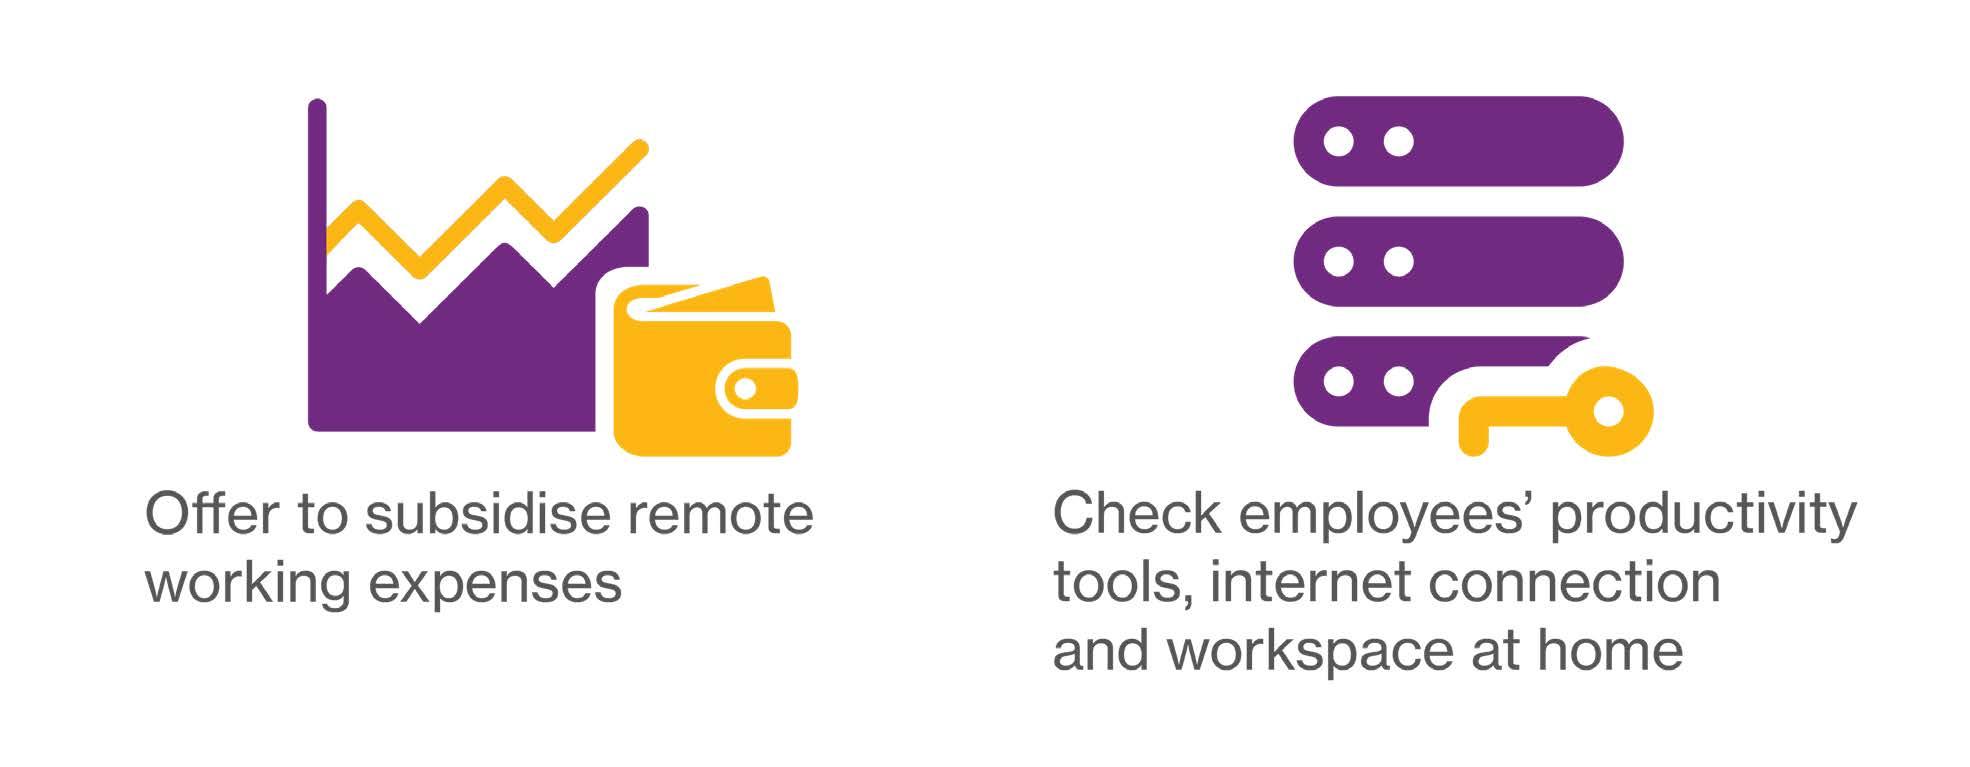 Organisations may offer to subsidise remote working expenses, and check employees’ productivity tools, internet connection and workspace at home.